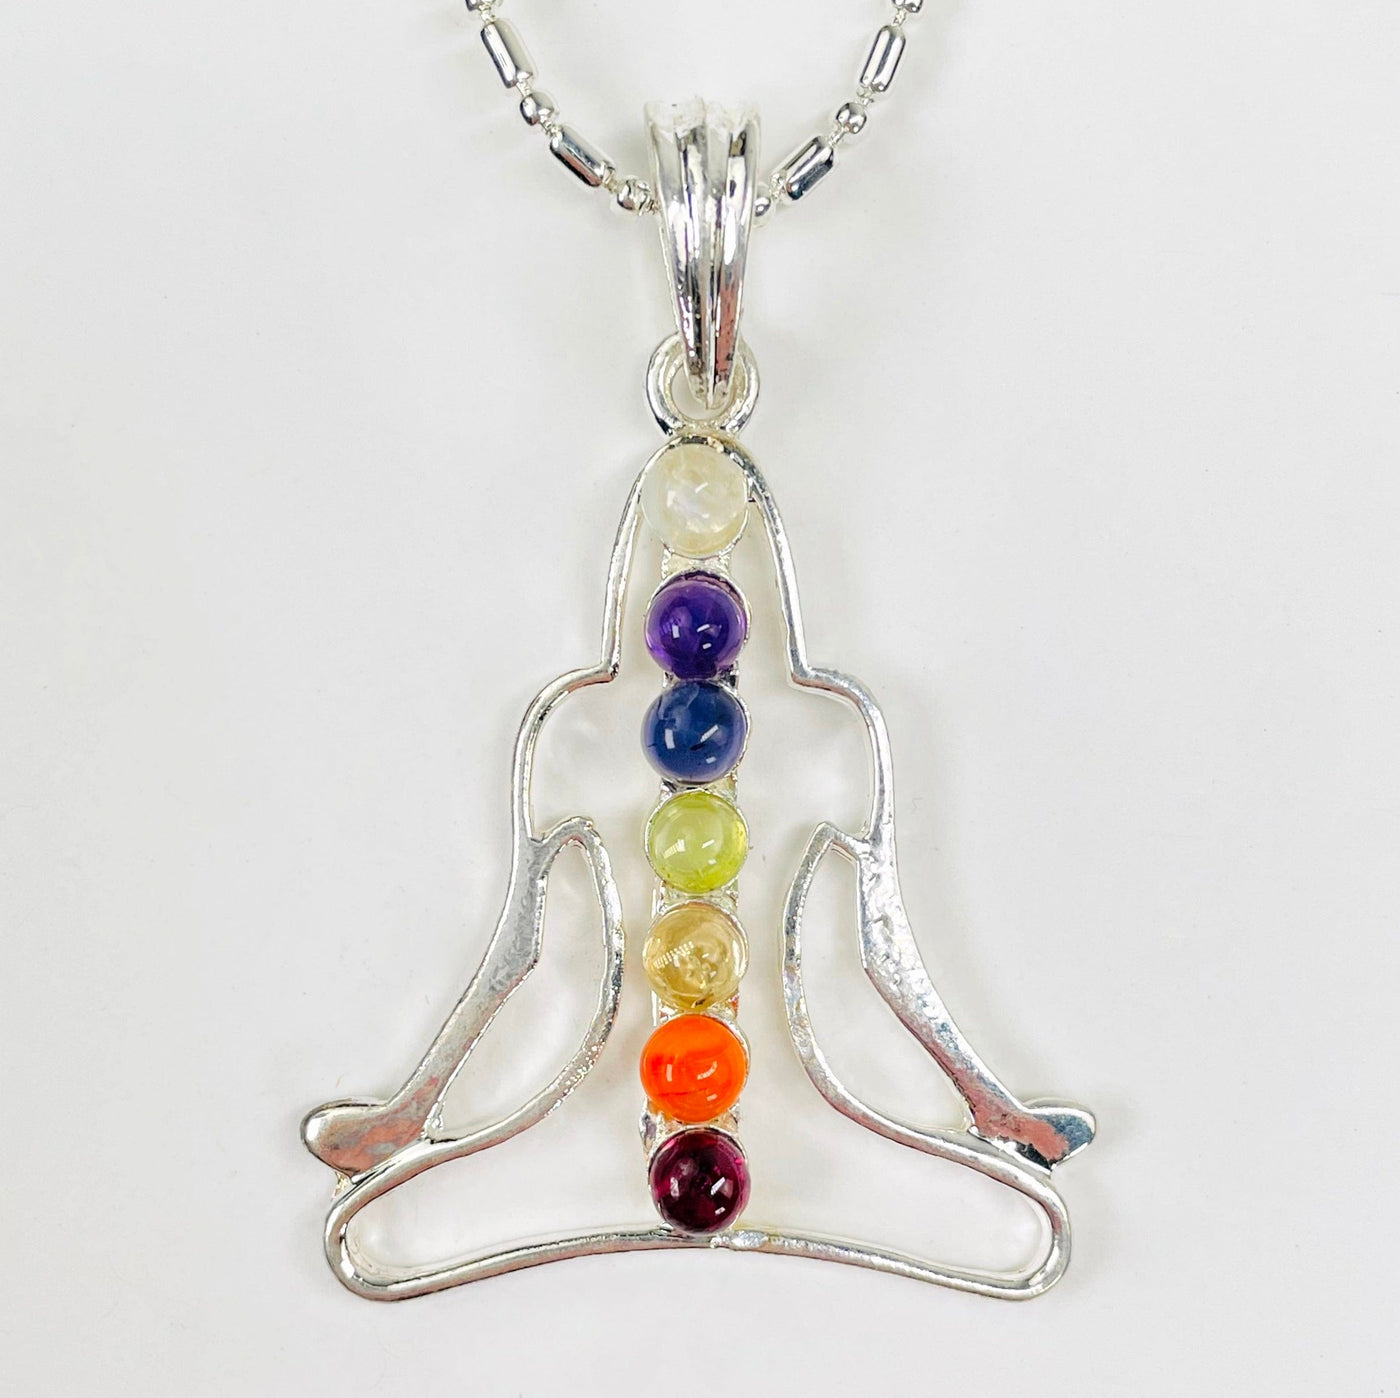 close up of one chakra buddha pendant necklace for details